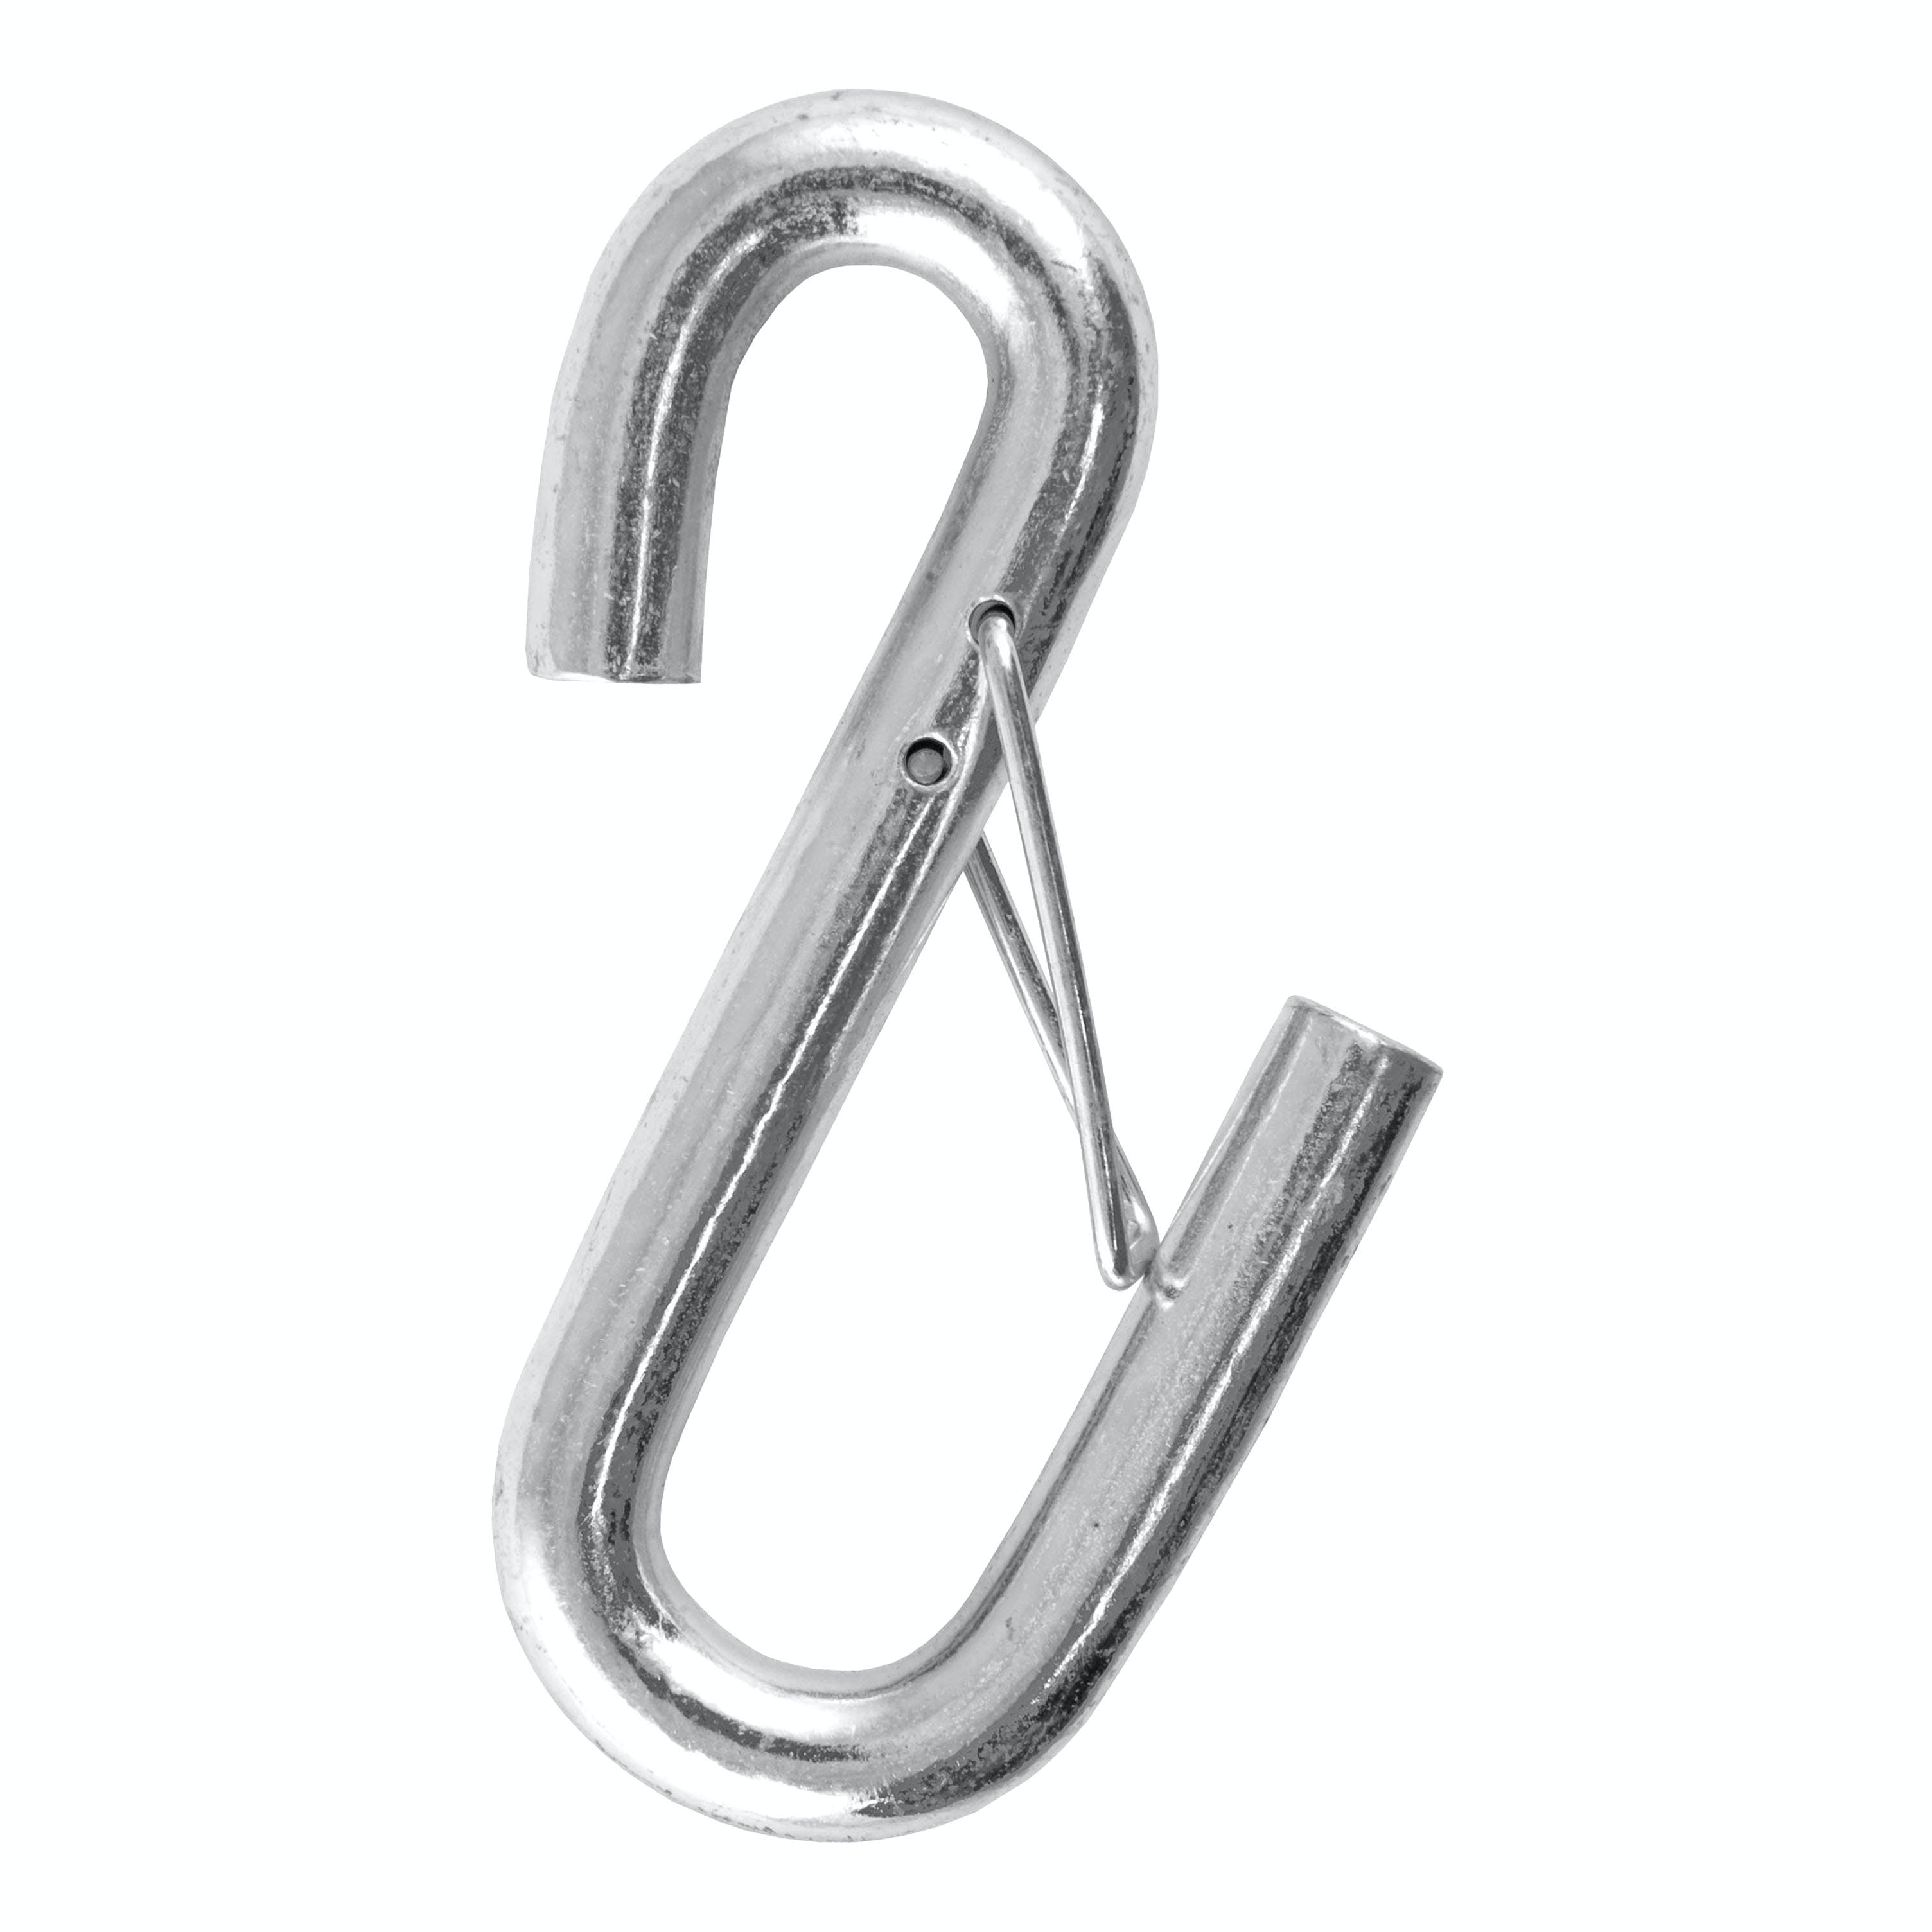 CURT 81820 Certified 7/16 Safety Latch S-Hook (5,000 lbs.)